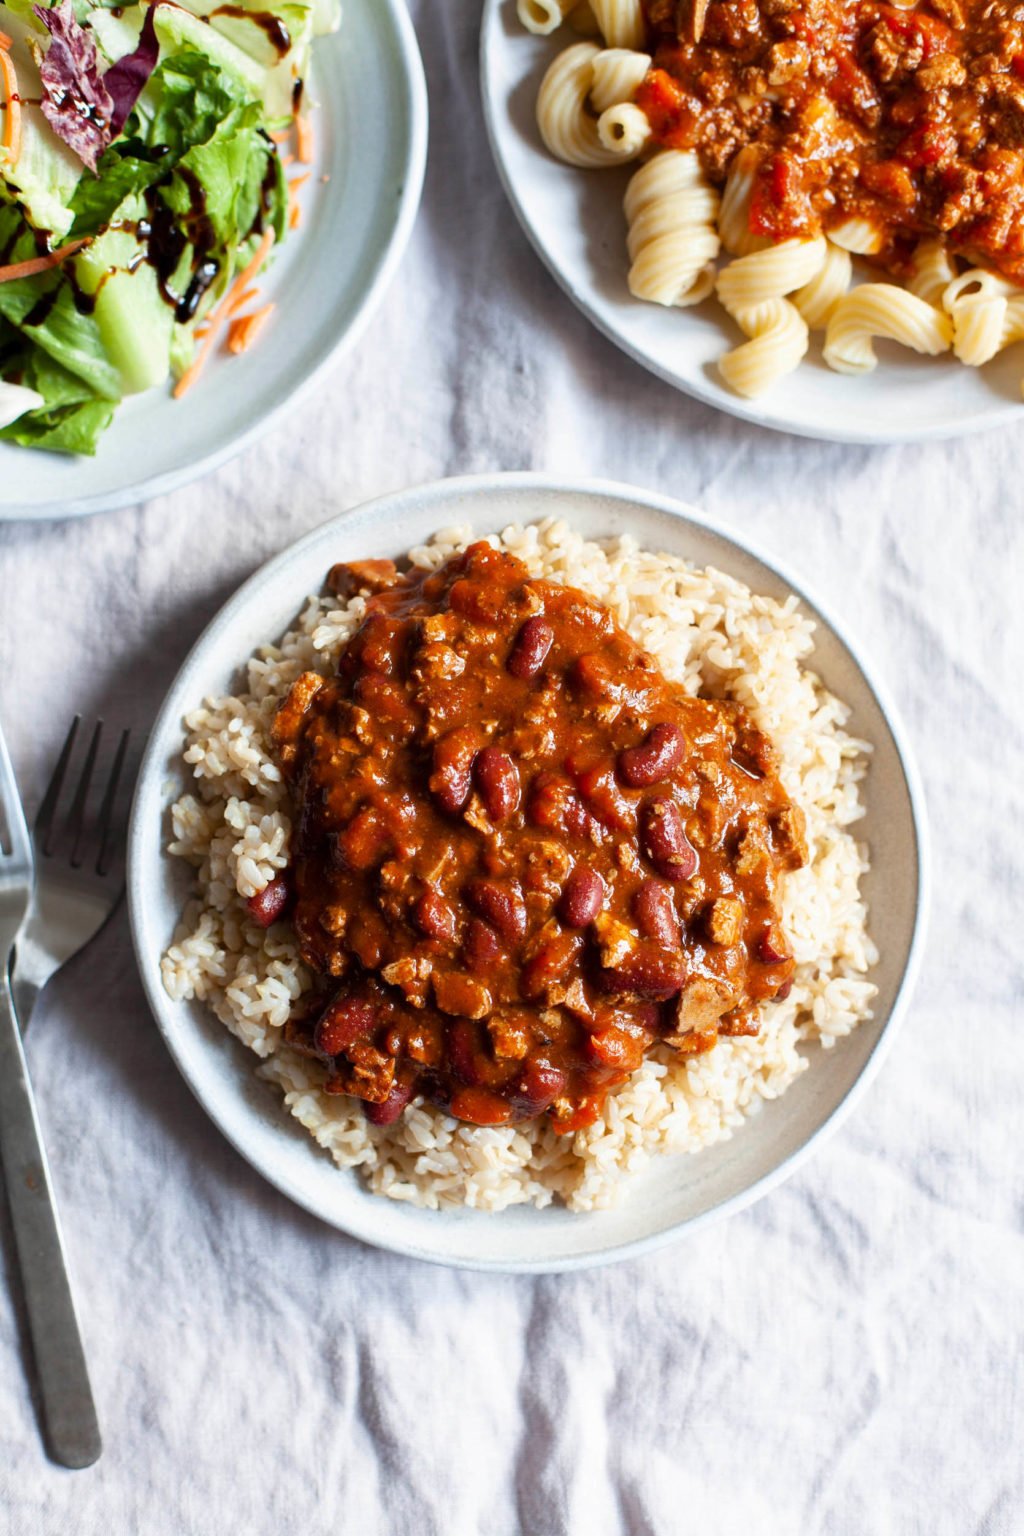 Nasoya's Plantspired Meal Solutions feature an easy vegan chili, which has been scooped onto a plate of brown rice.